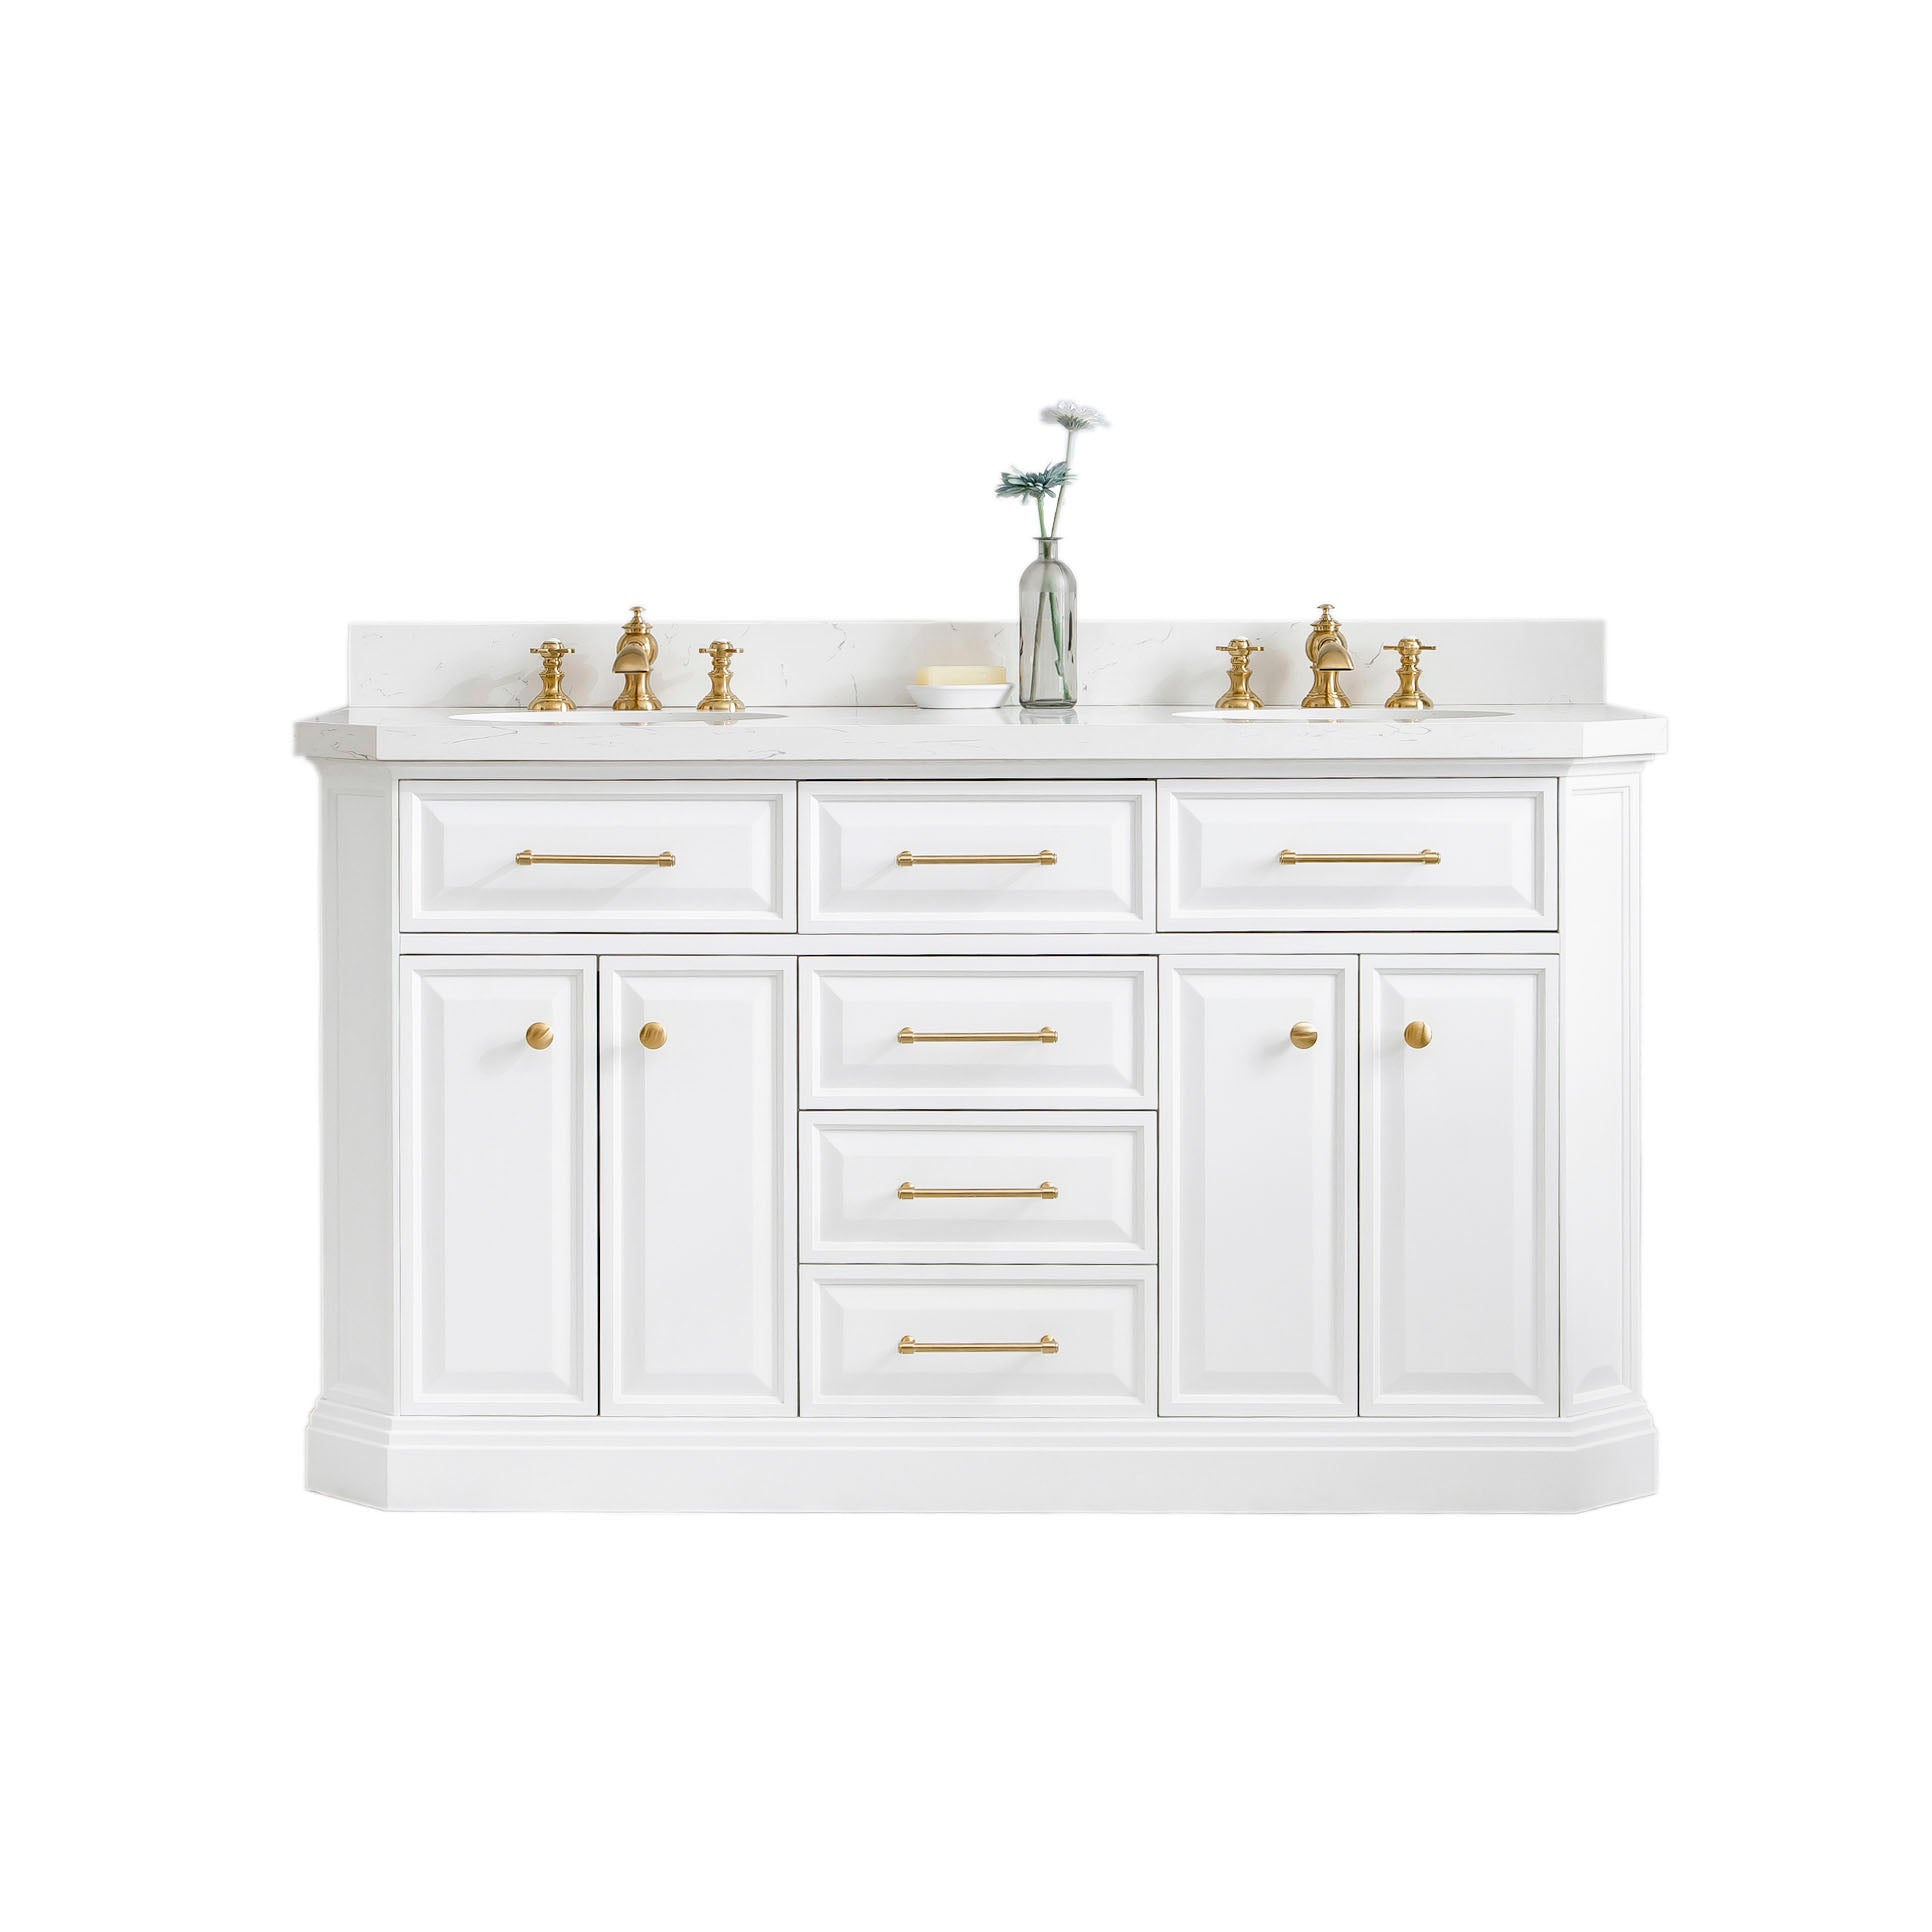 Water Creation | 60" Palace Collection Quartz Carrara Pure White Bathroom Vanity Set With Hardware And F2-0013 Faucets in Satin Gold Finish And Only Mirrors in Chrome Finish | PA60QZ06PW-000FX1306